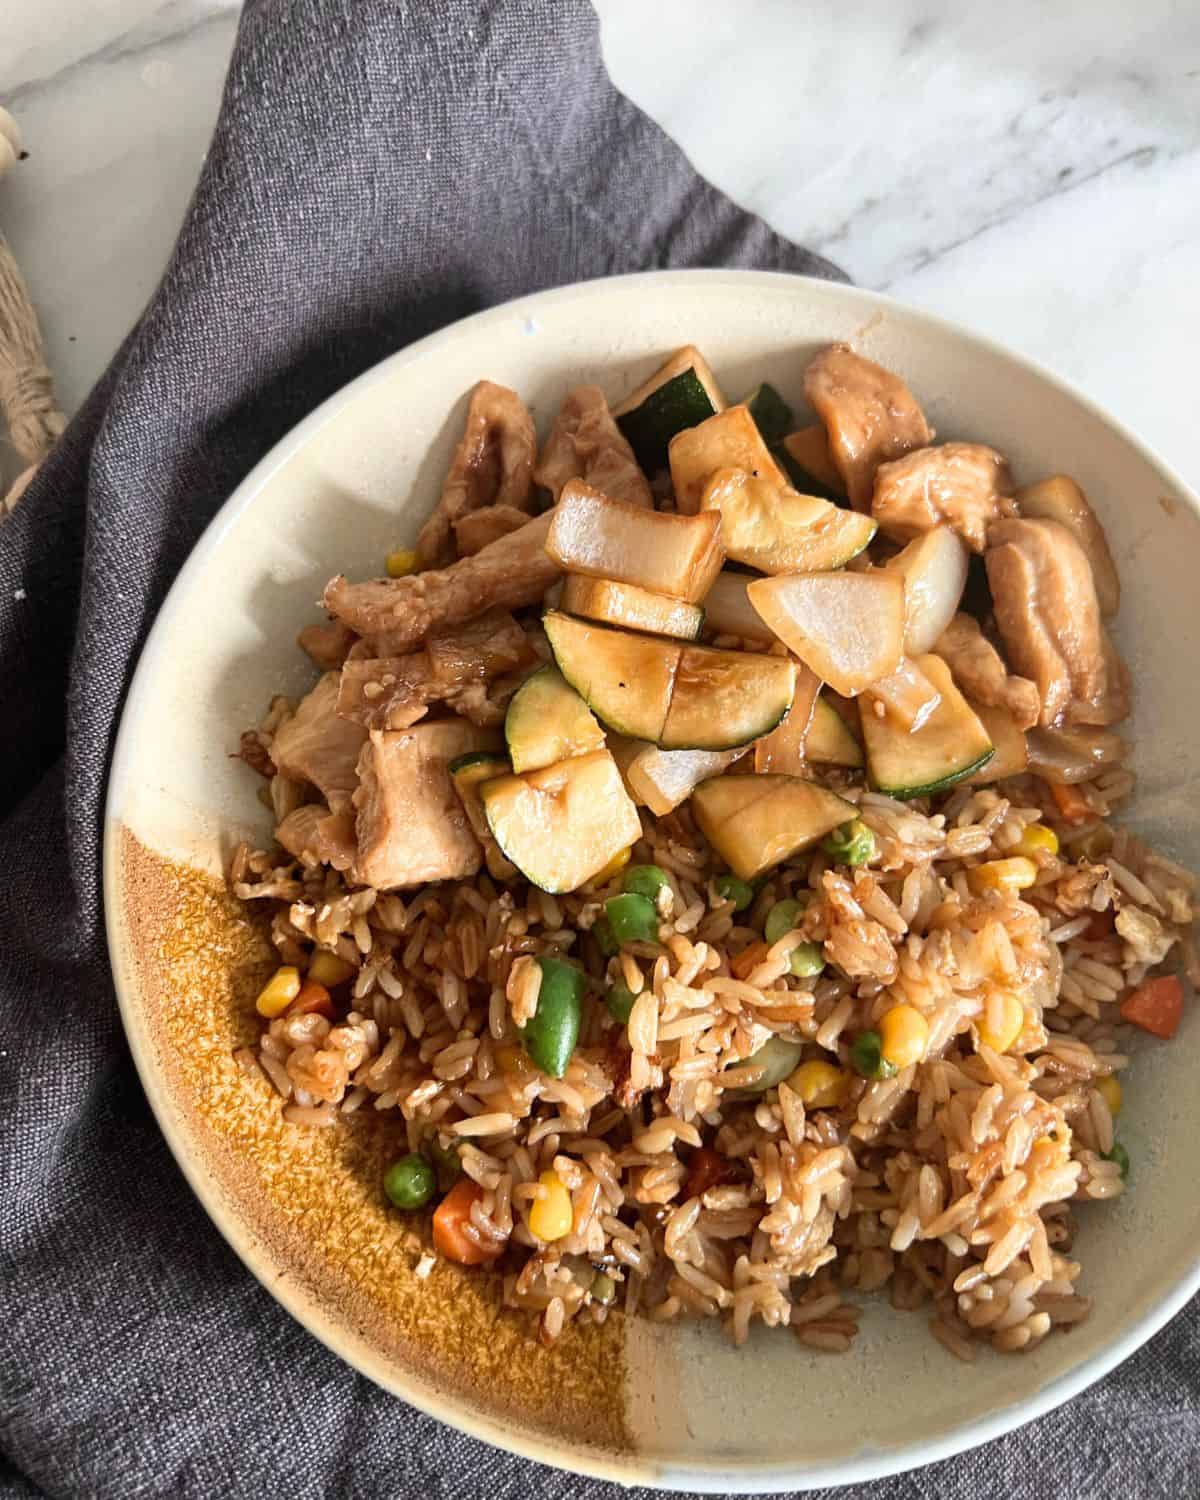 Blackstone fried rice next to chicken and vegetables on plate. 